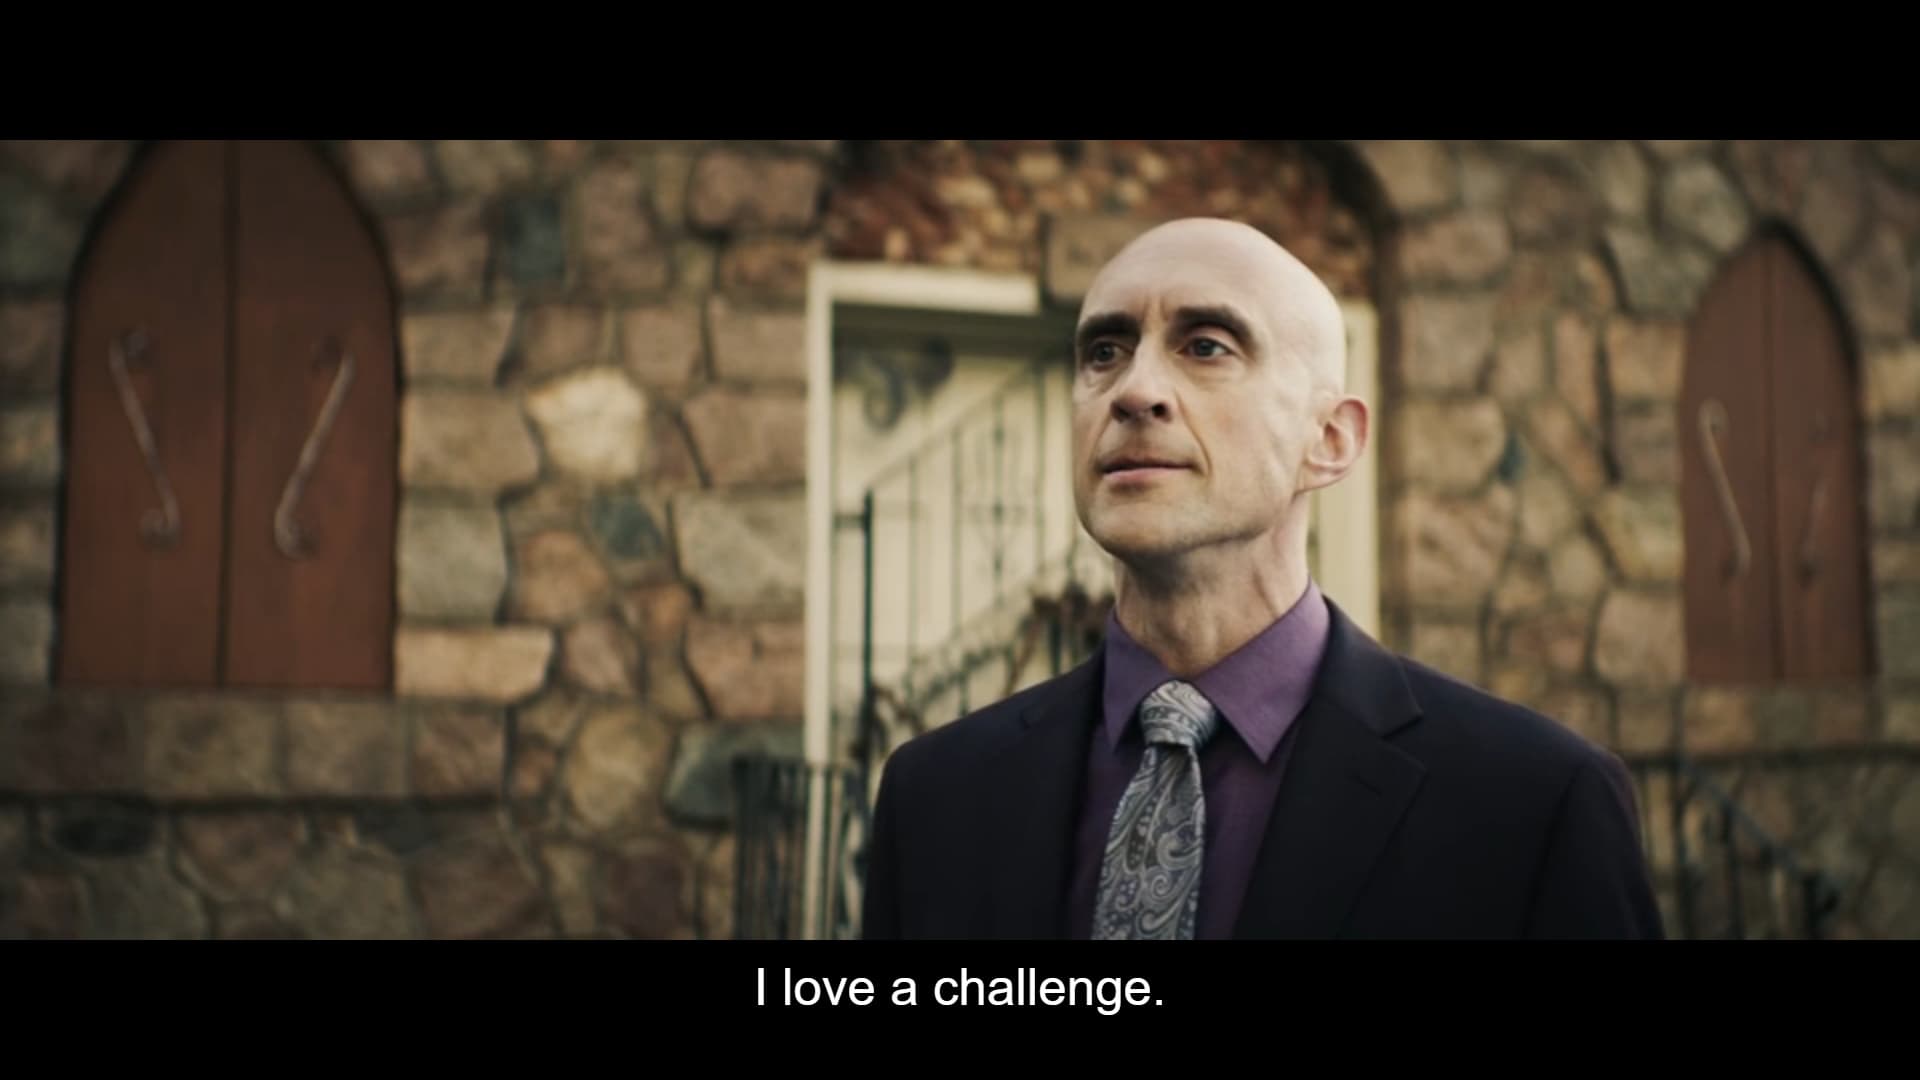 Luc (Charles Hubbell) noting he likes a challenge